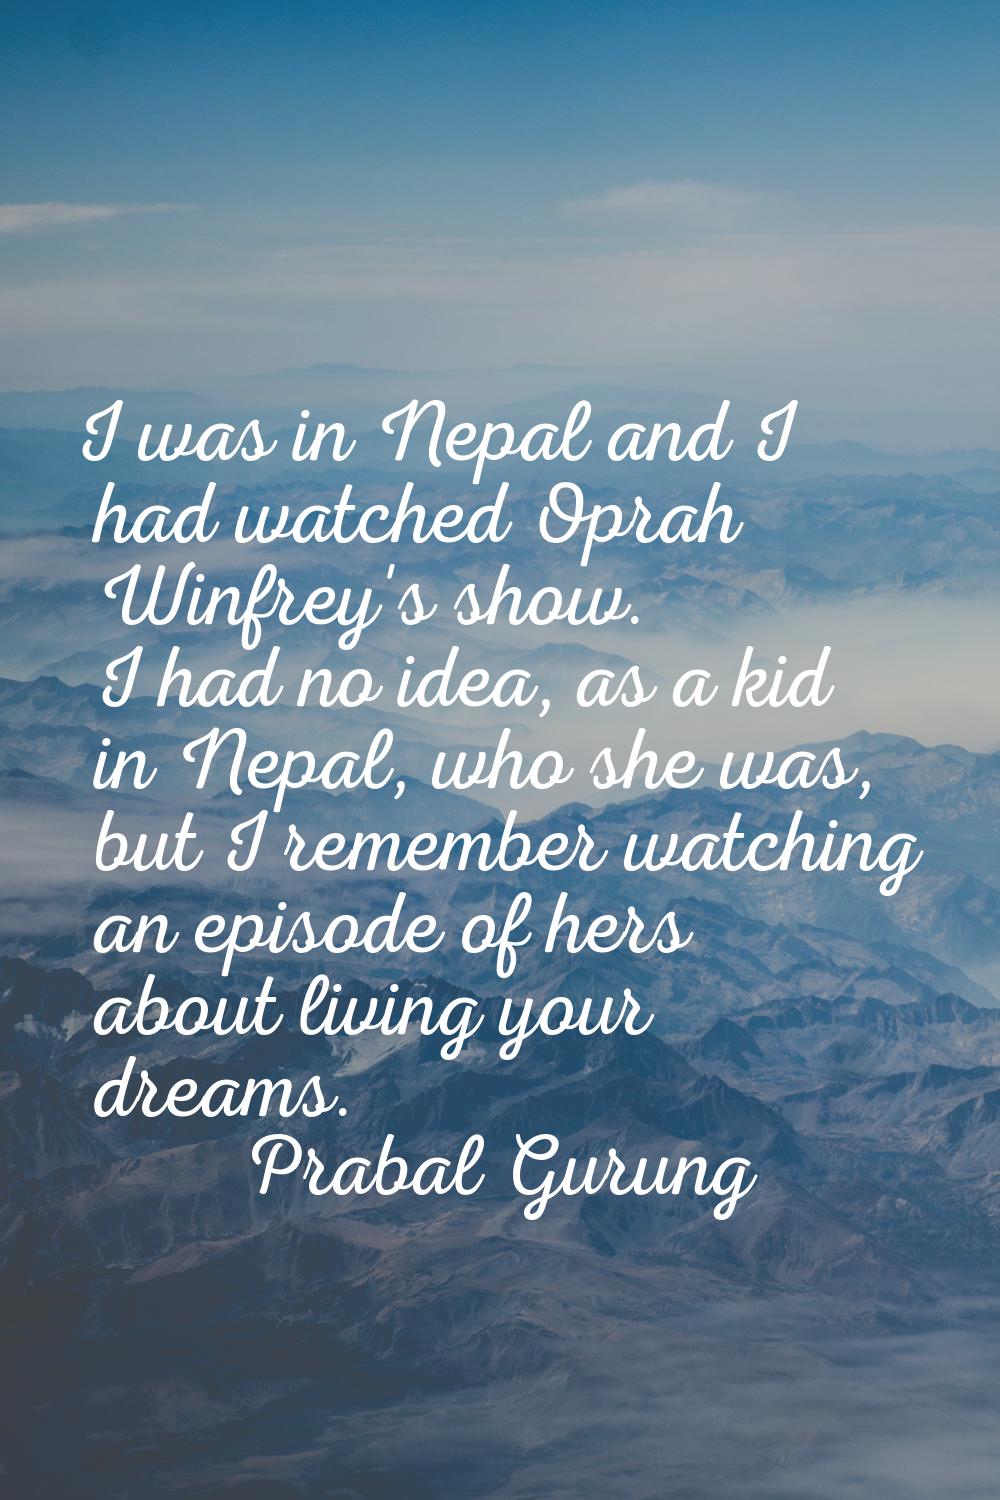 I was in Nepal and I had watched Oprah Winfrey's show. I had no idea, as a kid in Nepal, who she wa